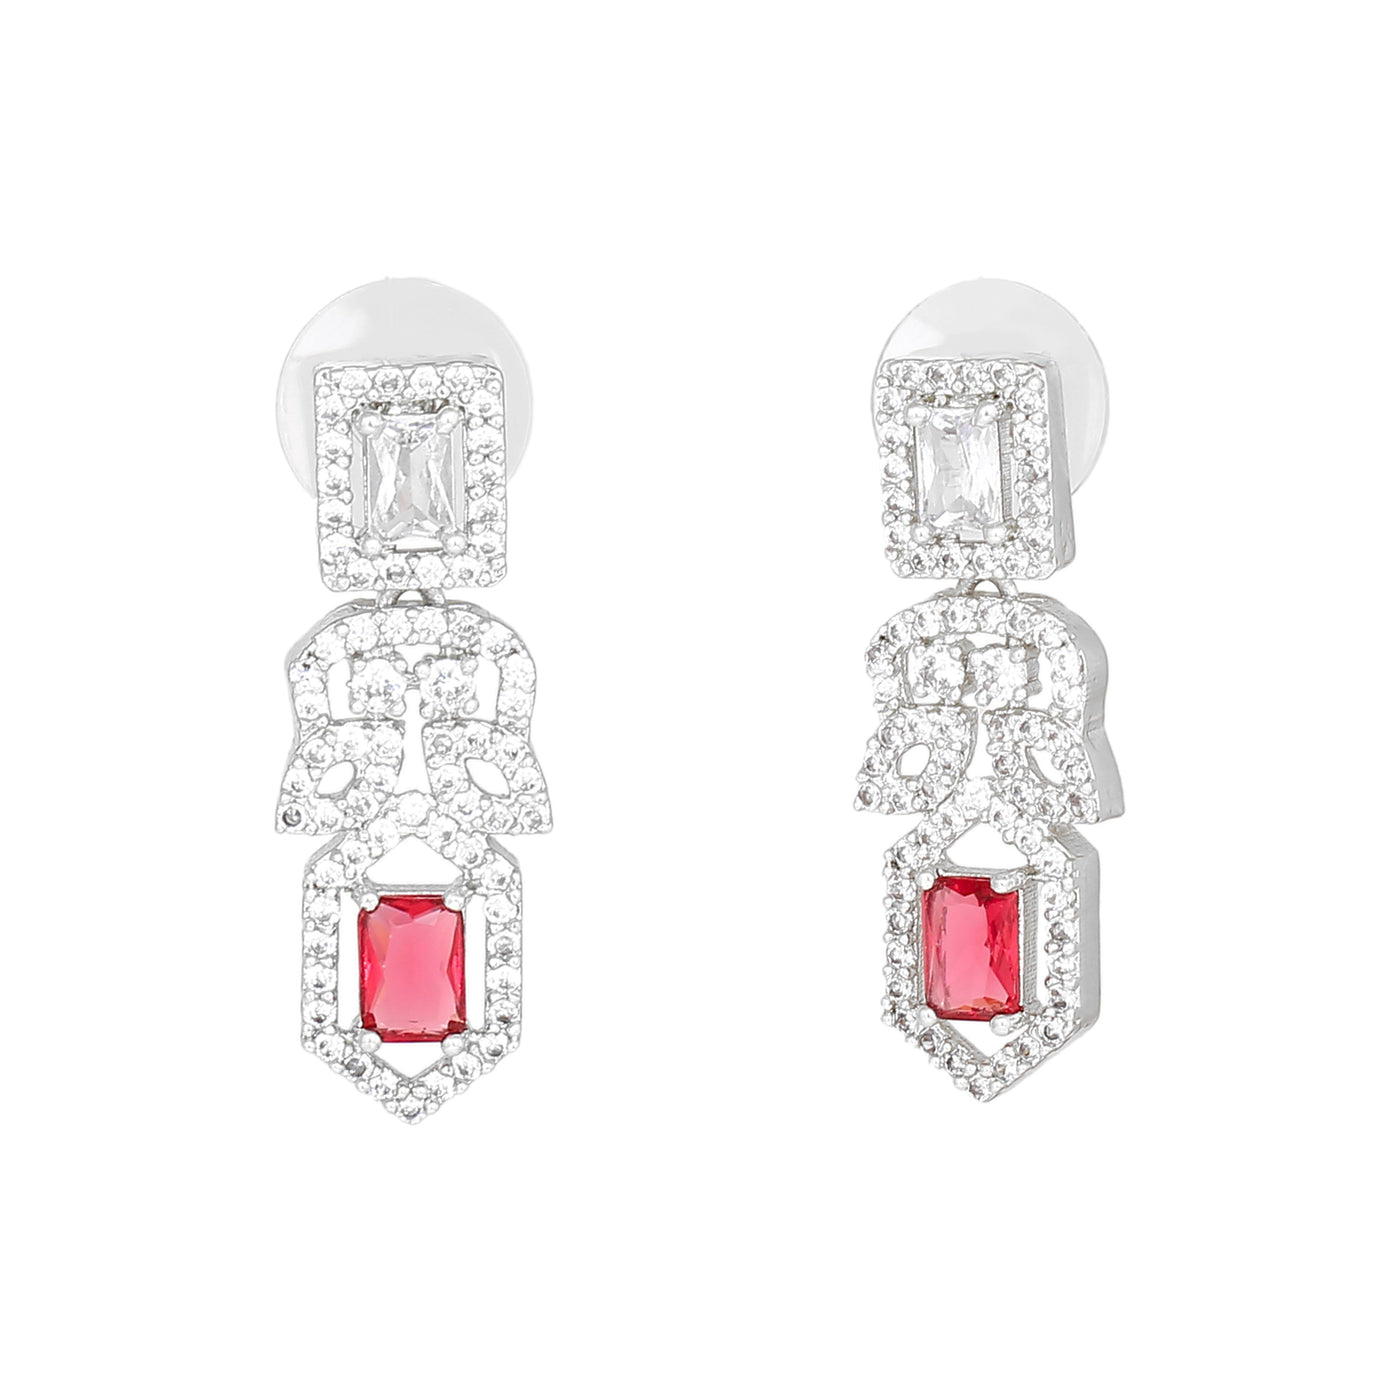 Estele Rhodium Plated CZ Sparkling Designer Earrings with Tourmaline Pink Crystals for Women